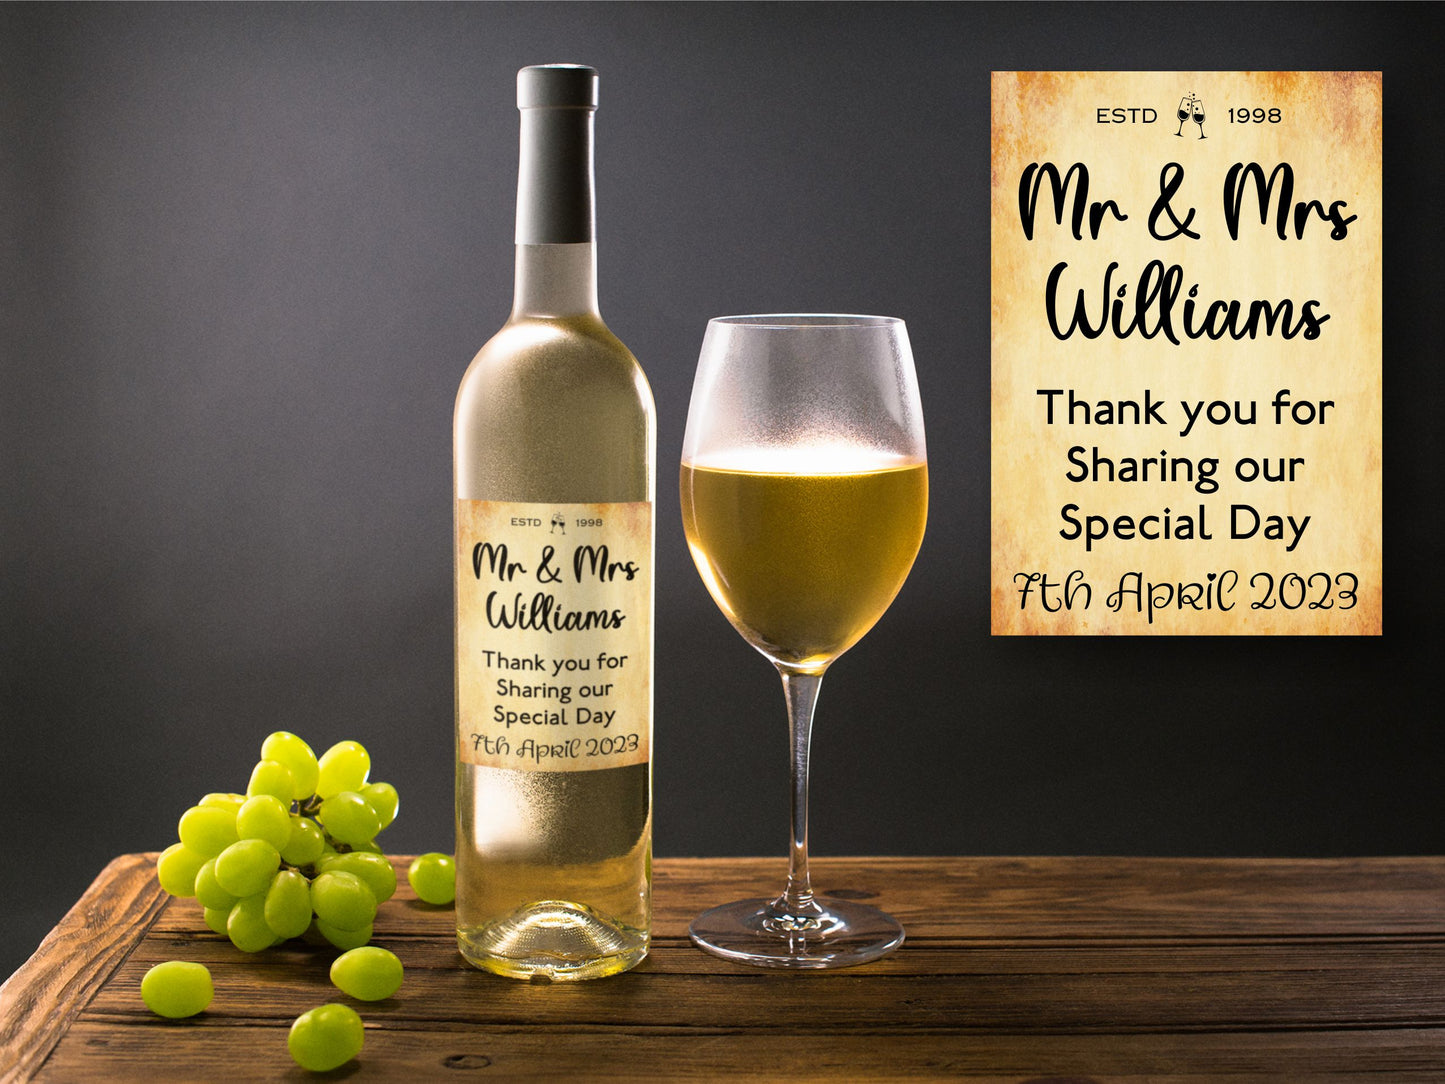 Wedding Reception Bottle Labels x2 - Vintage Style - Any Name Date Year and Message - To fit Wine Alcohol Bottles 68x99mm